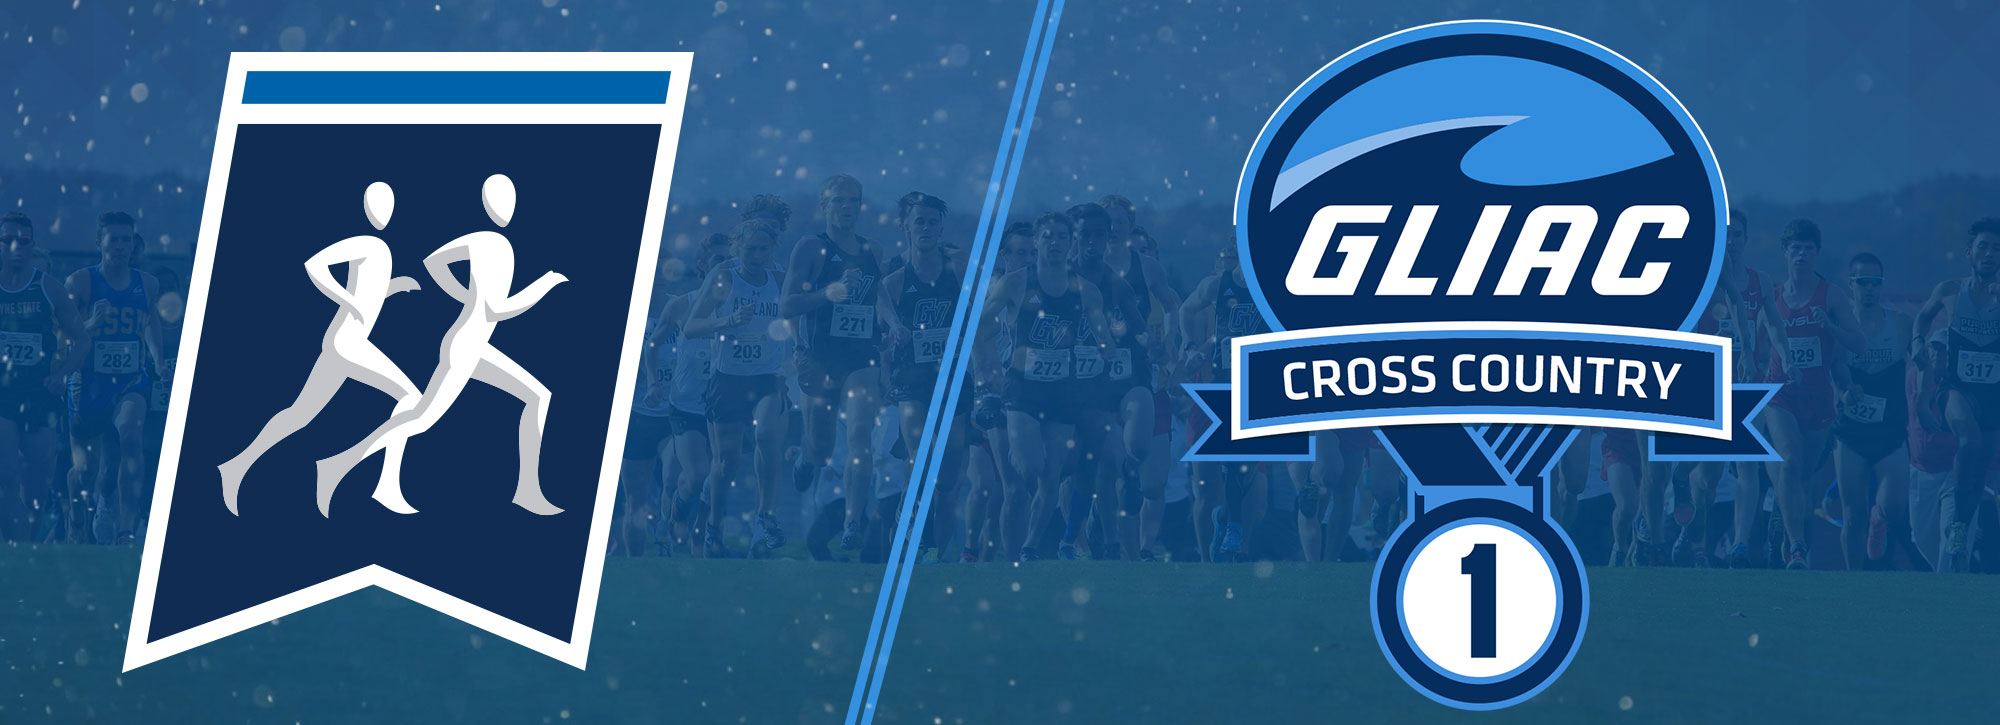 NCAA Cross Country Championships Qualifiers Announced; Four Teams, Four Individuals Headed to Sacramento